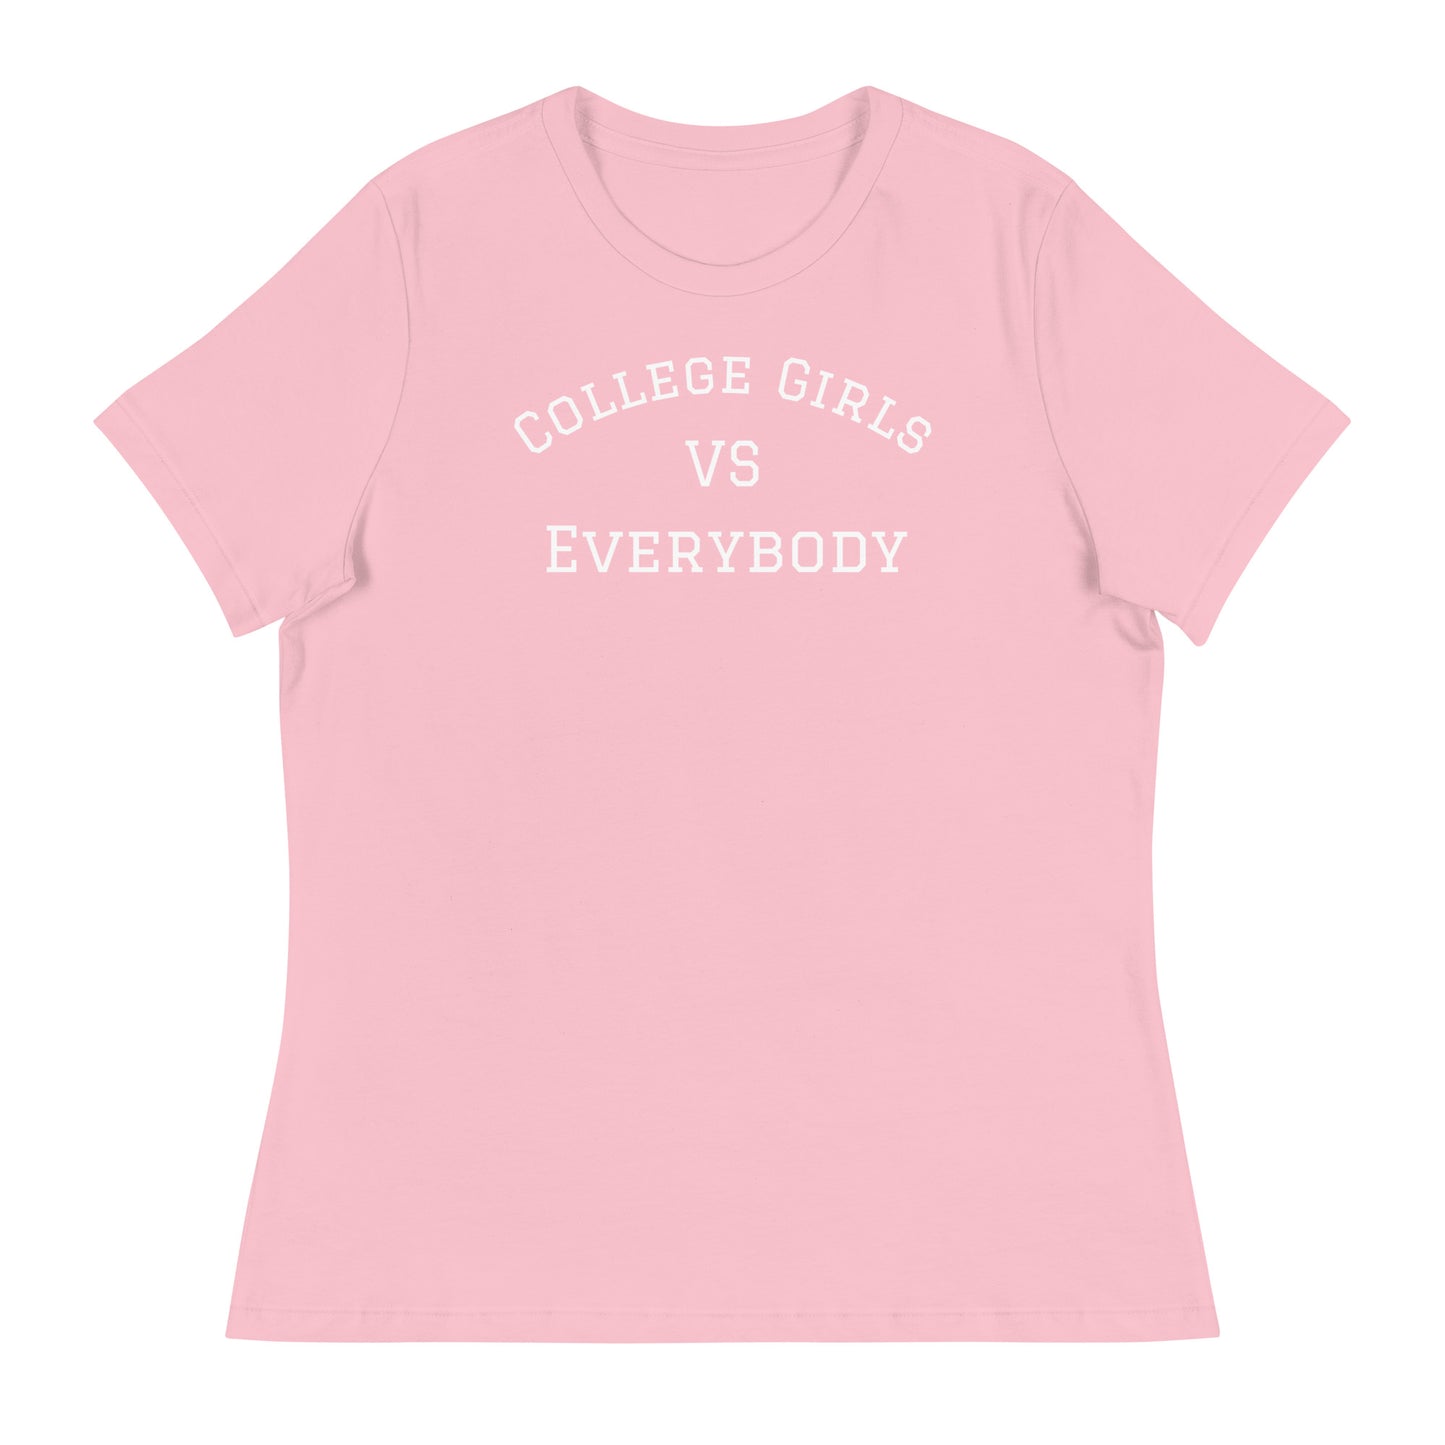 Best women's short sleeve college-casual pink tee shirt that celebrates college girls